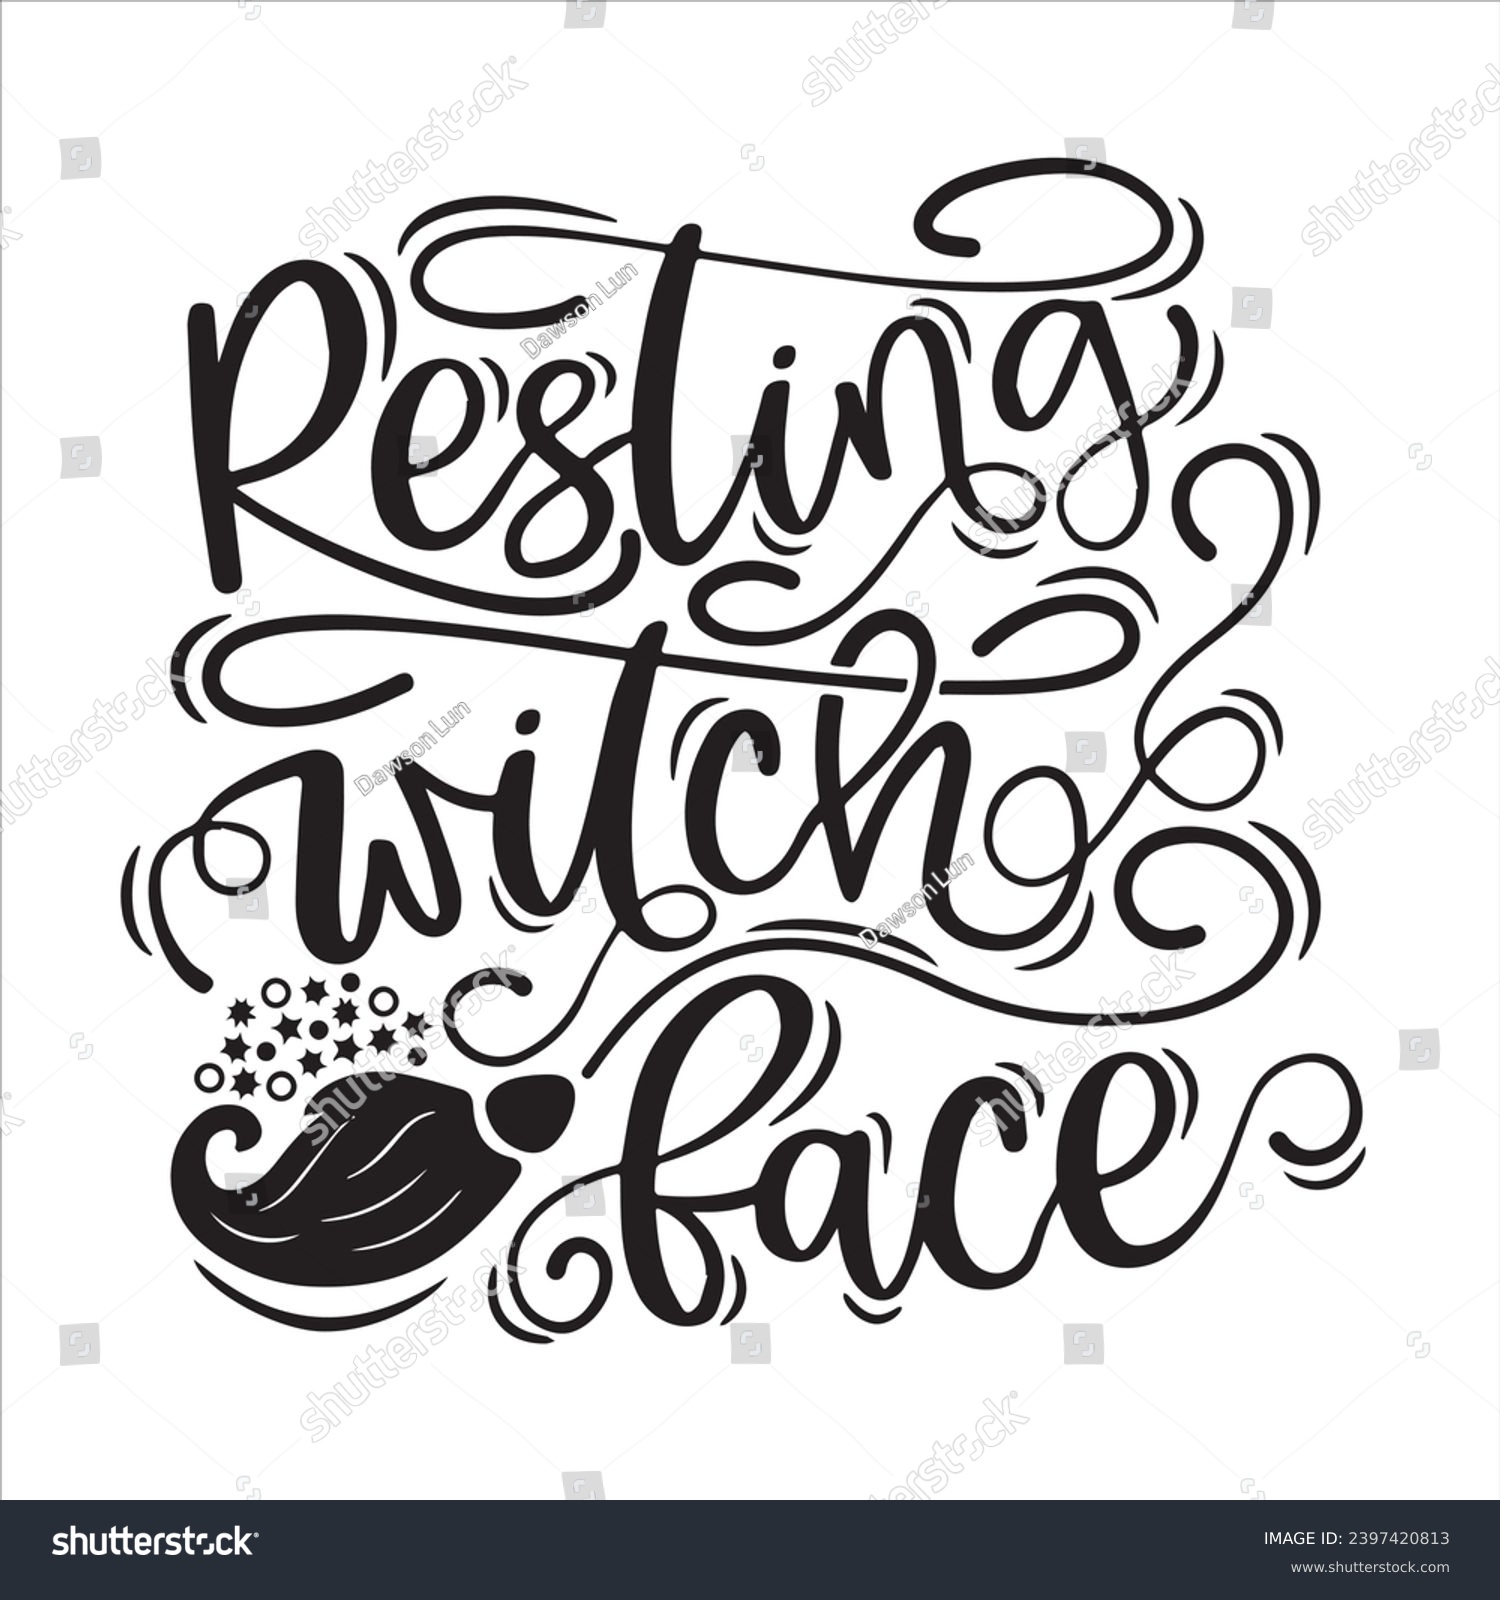 SVG of resting witch face background inspirational positive quotes, motivational, typography, lettering design svg